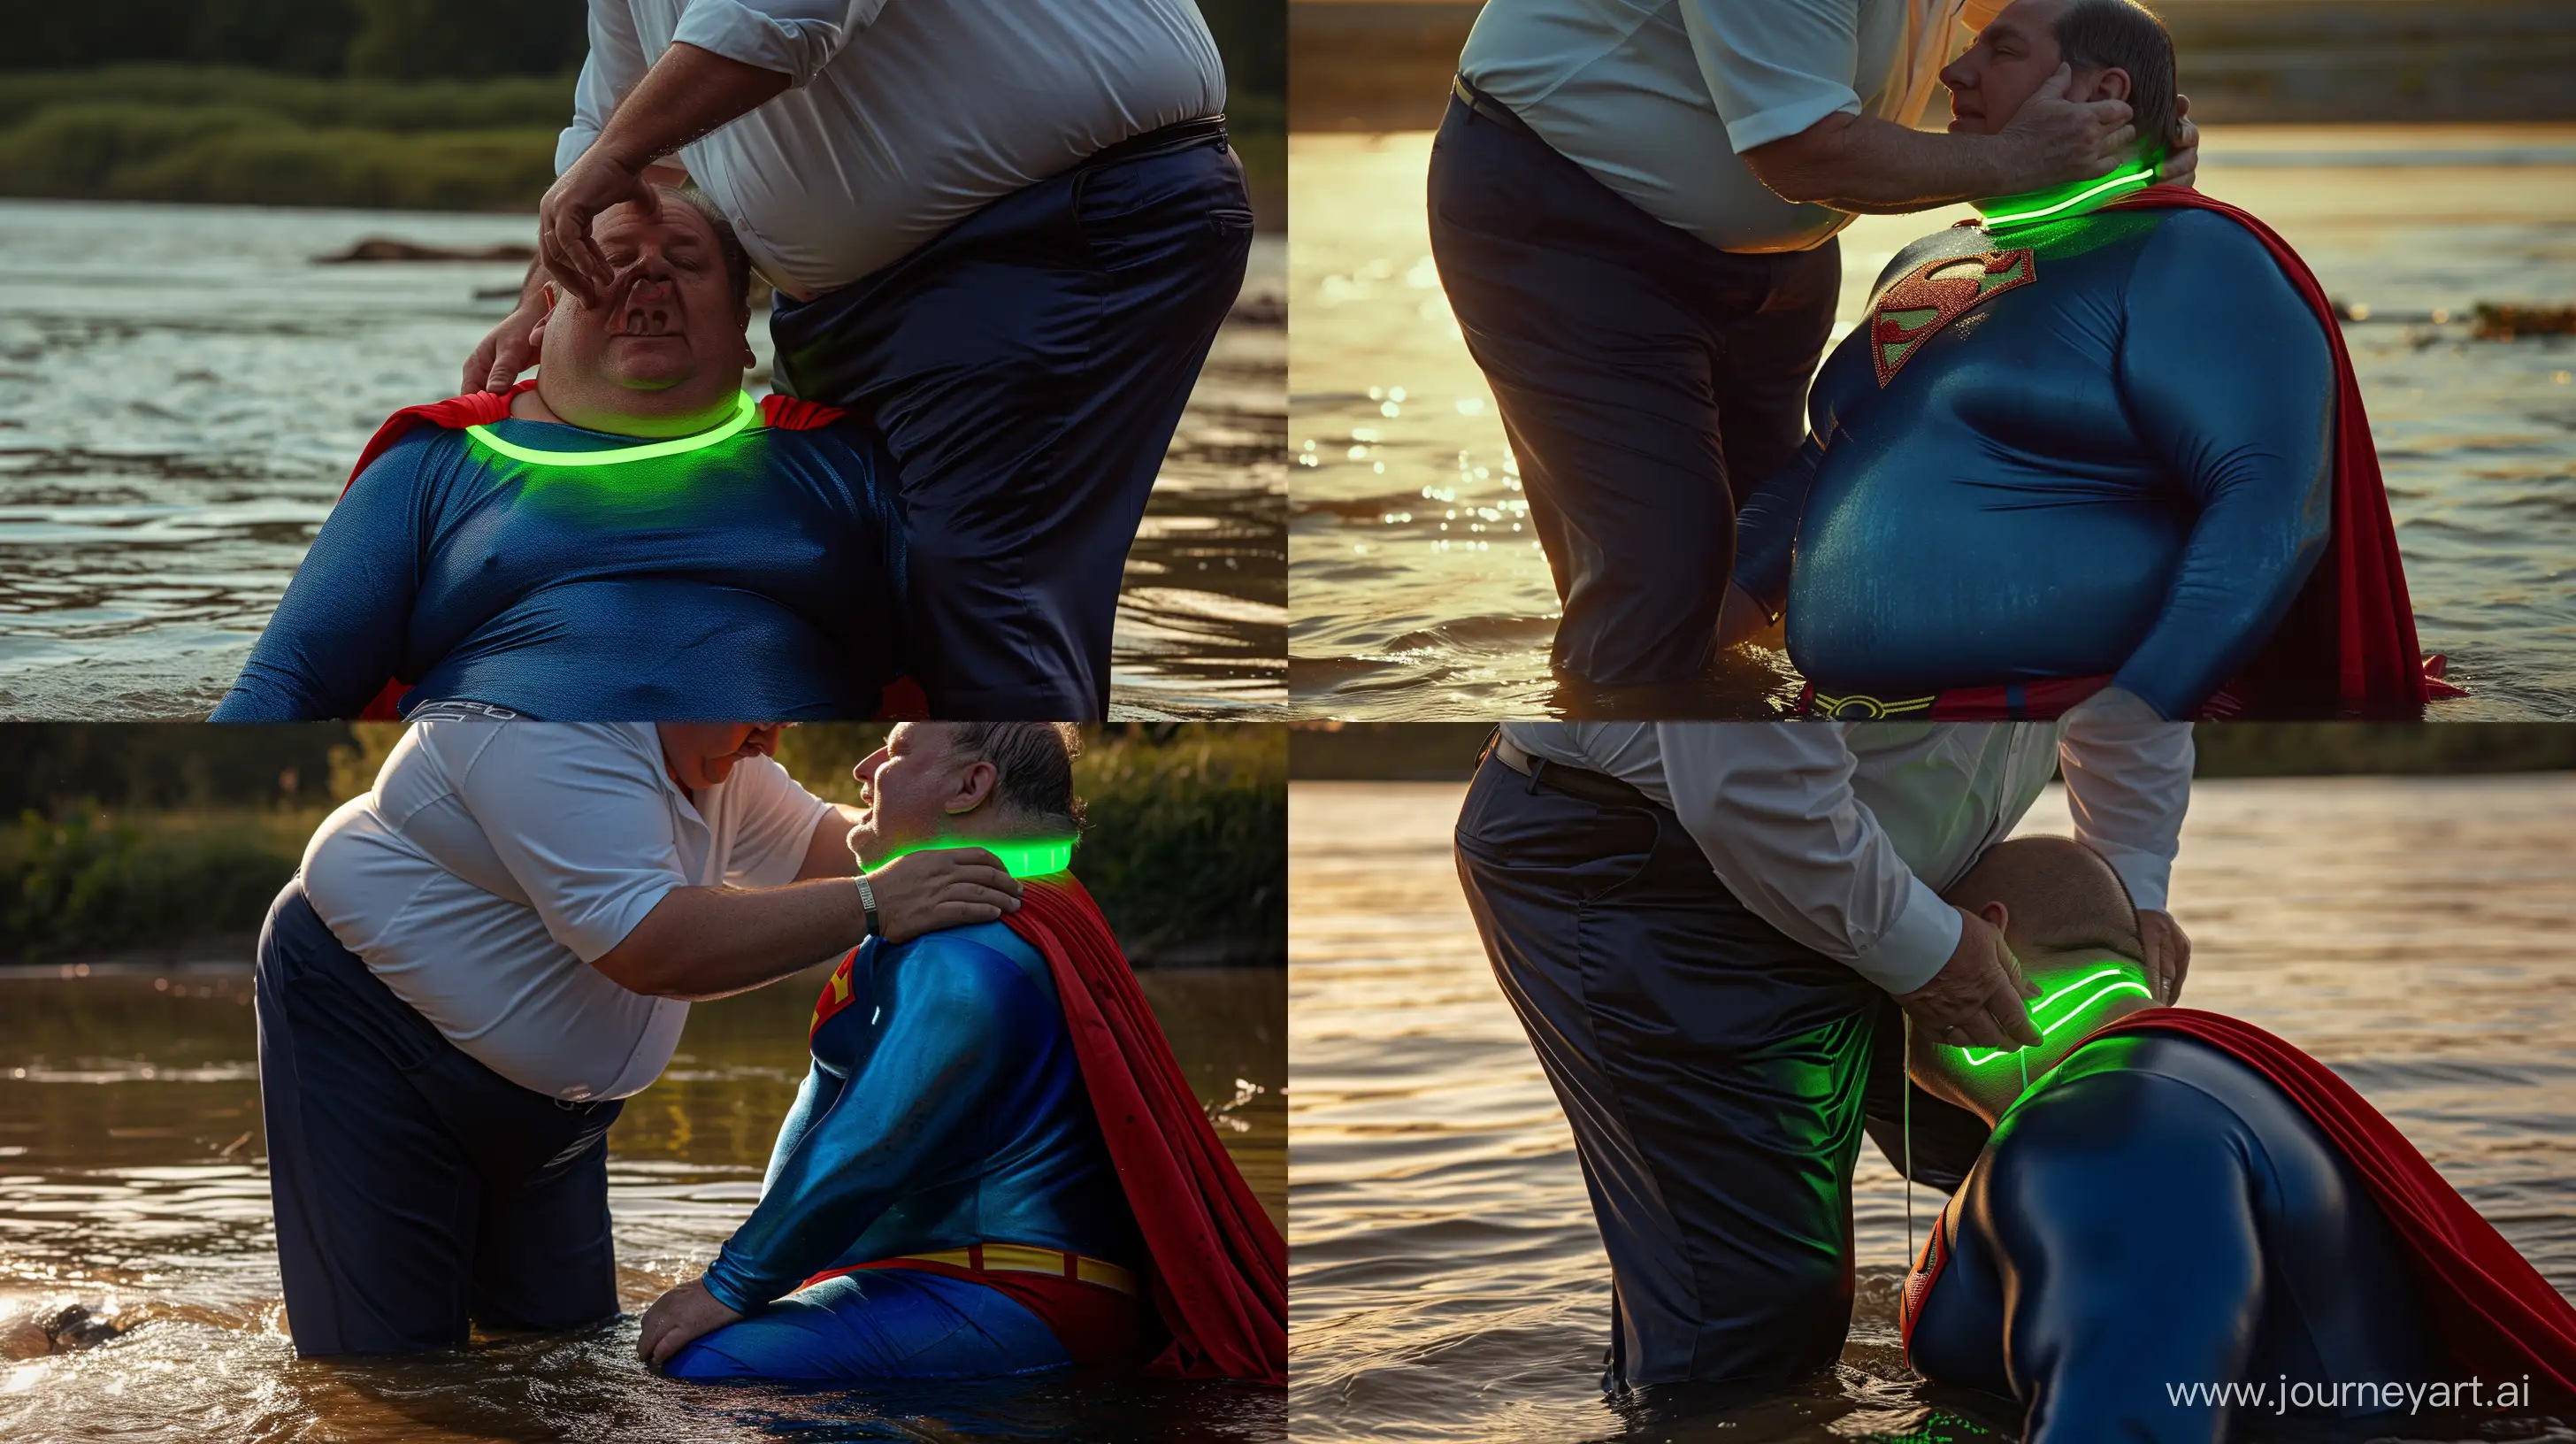 Eccentric-Superman-Emerges-Man-in-Neon-Collar-by-the-River